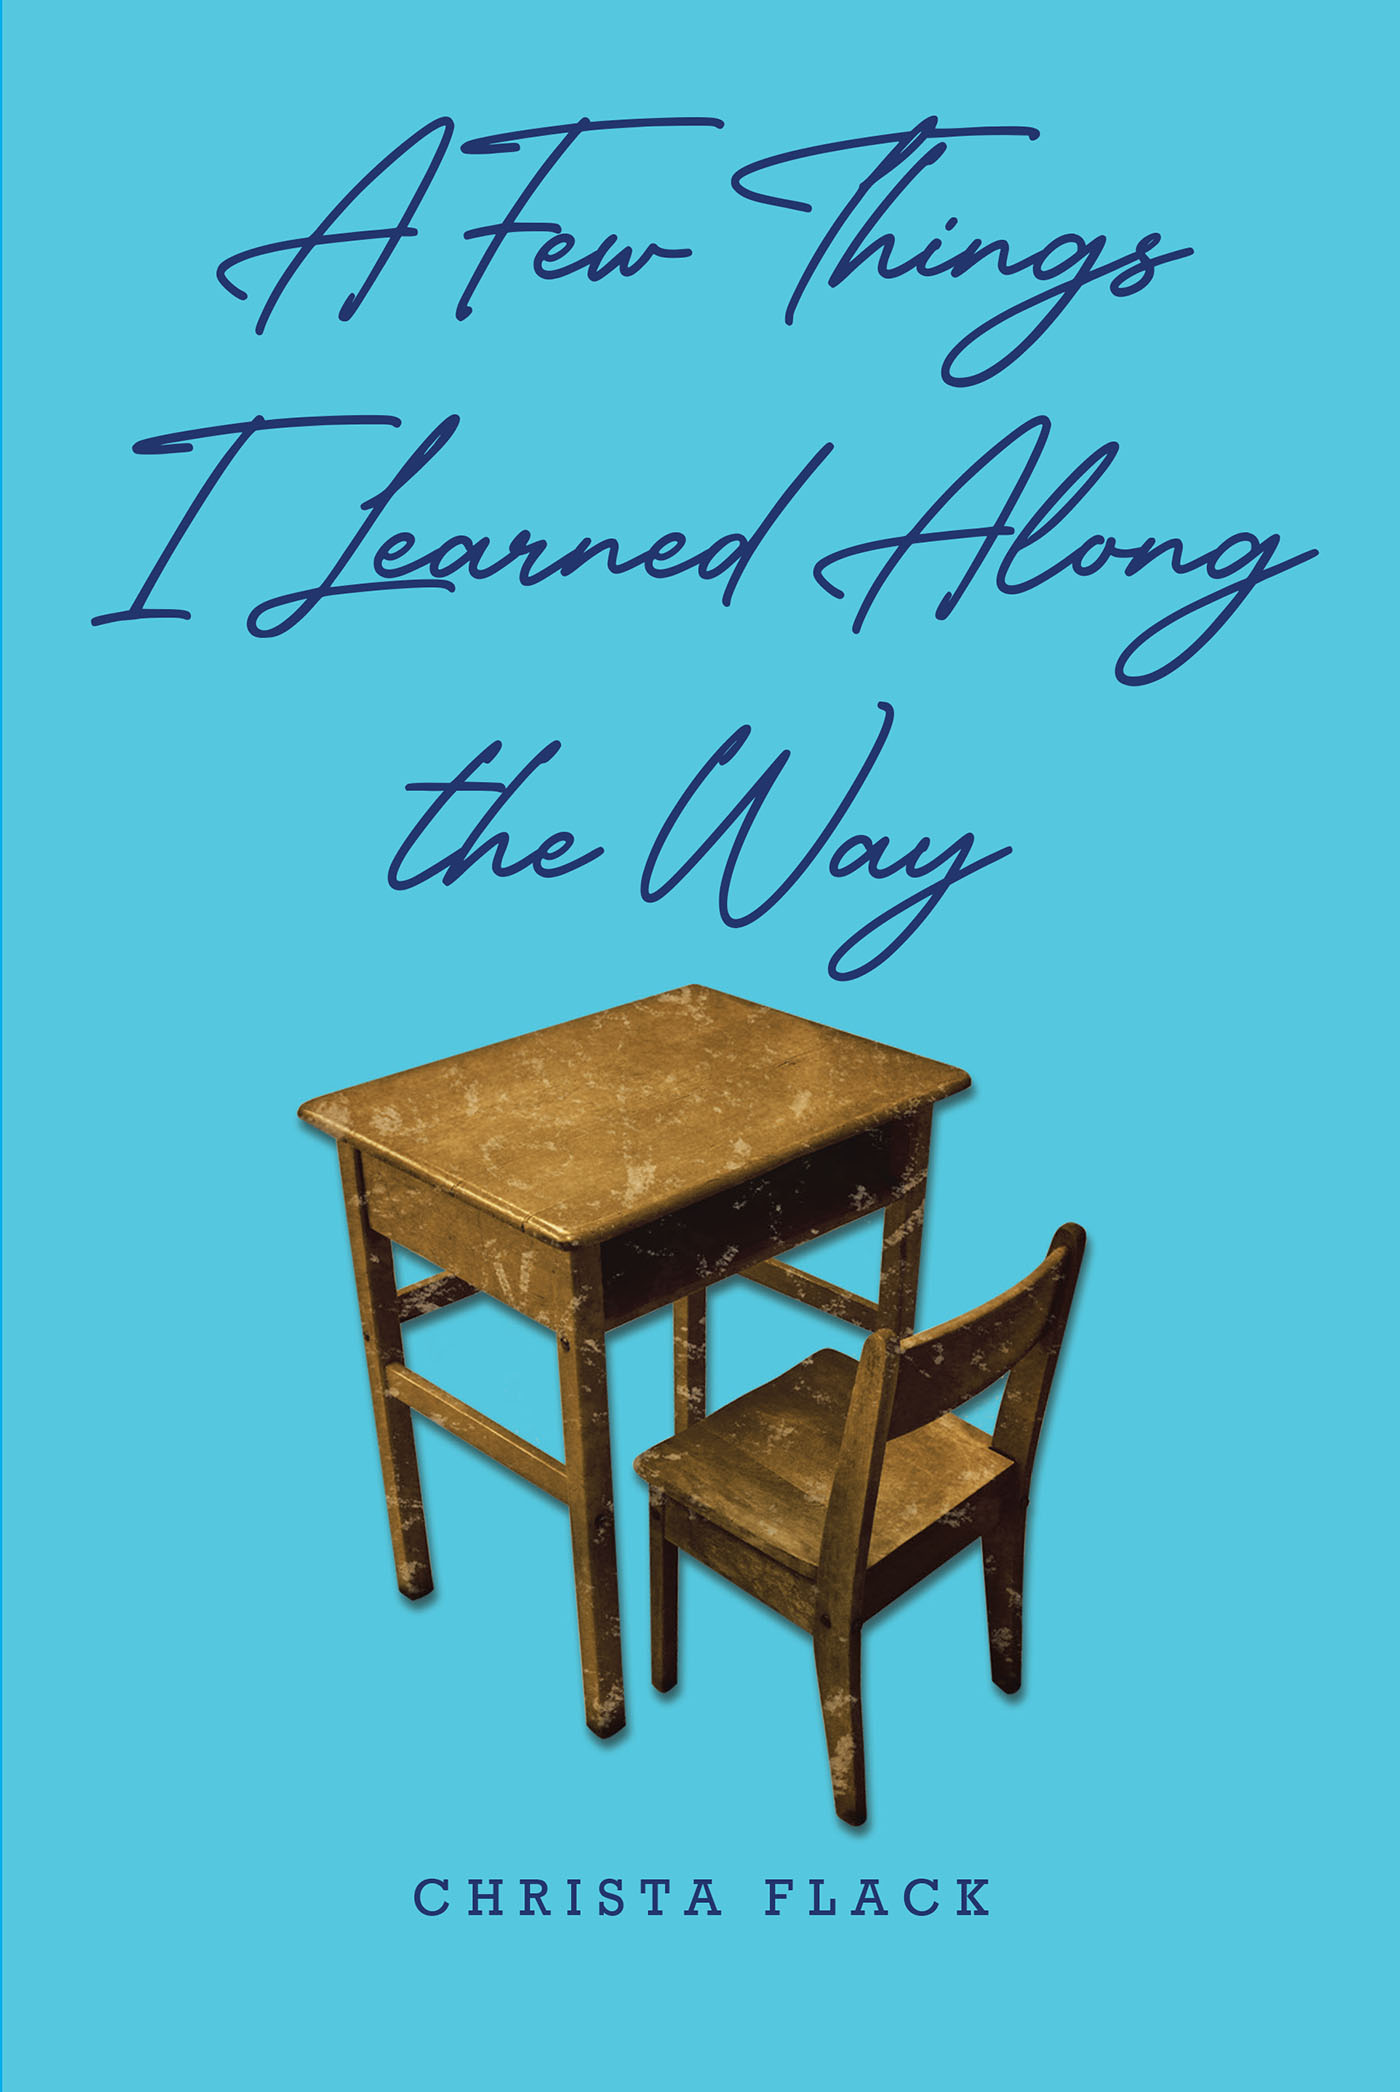 Christa Flack’s Newly Released "A Few Things I Learned Along the Way" is an Enjoyable Collection of Thoughtful Guidance and Life Lessons